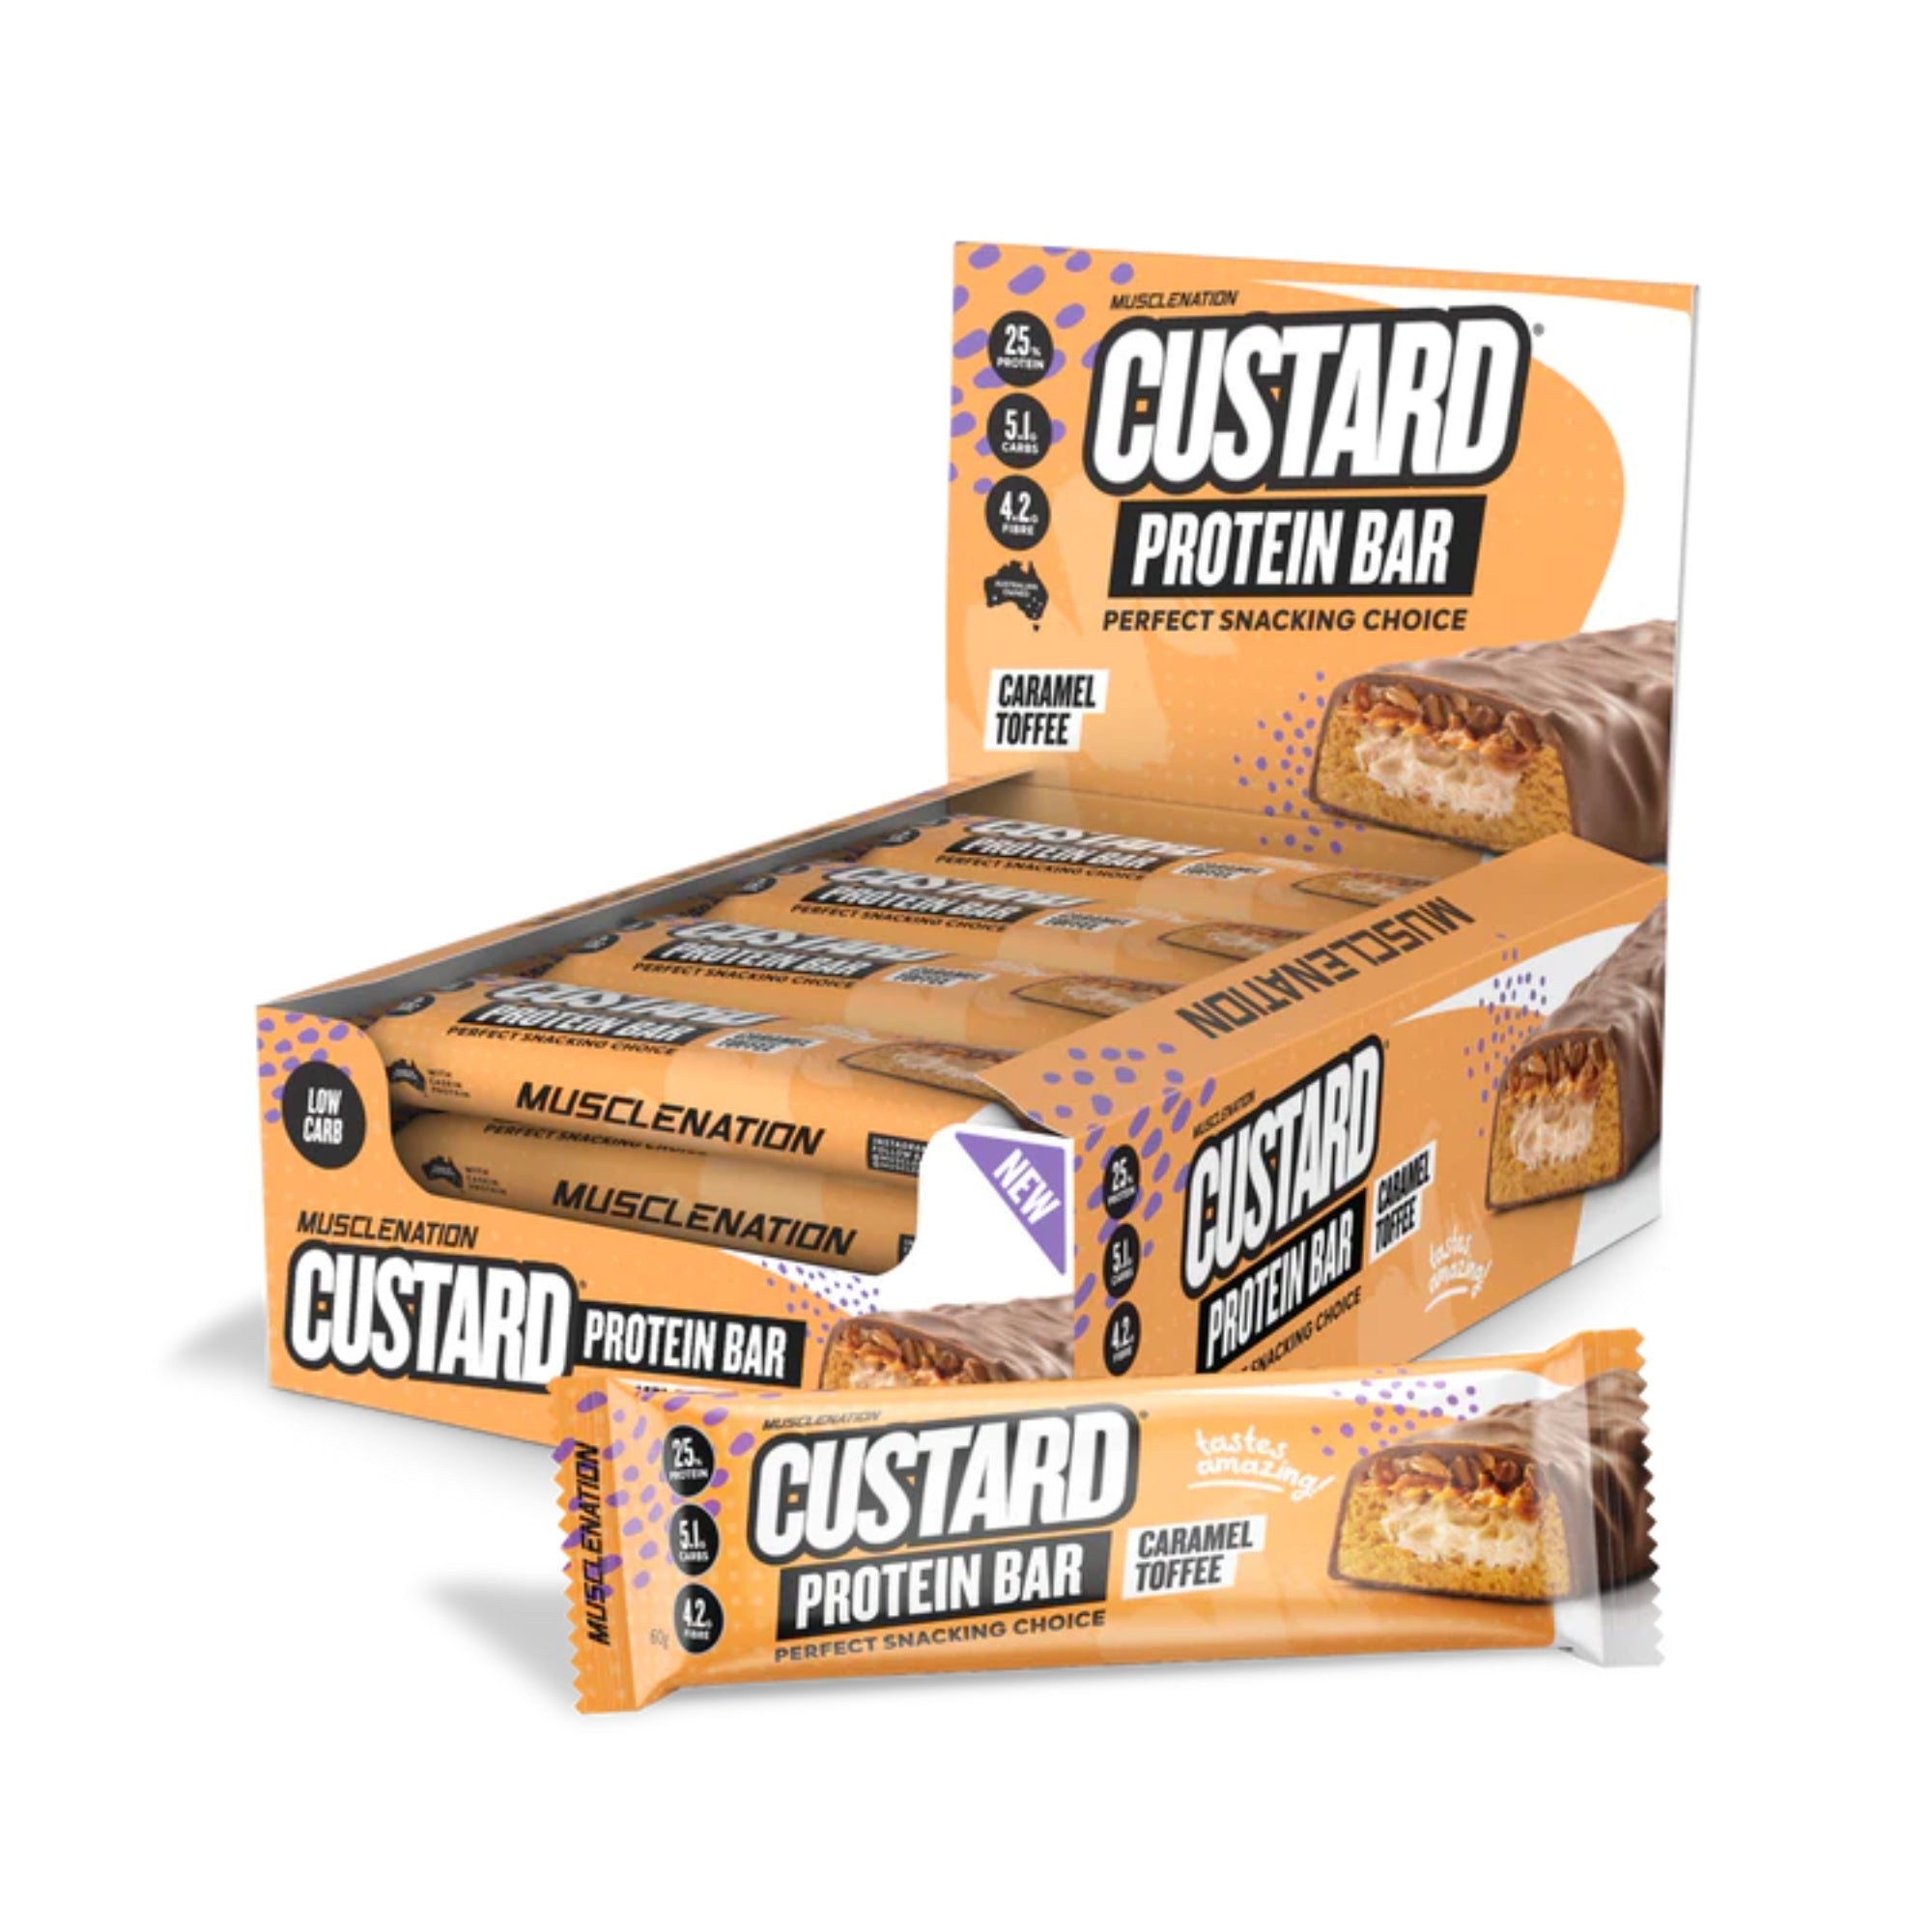 Muscle Nation Custard Protein Bar - Box of 12 Caramel Toffee